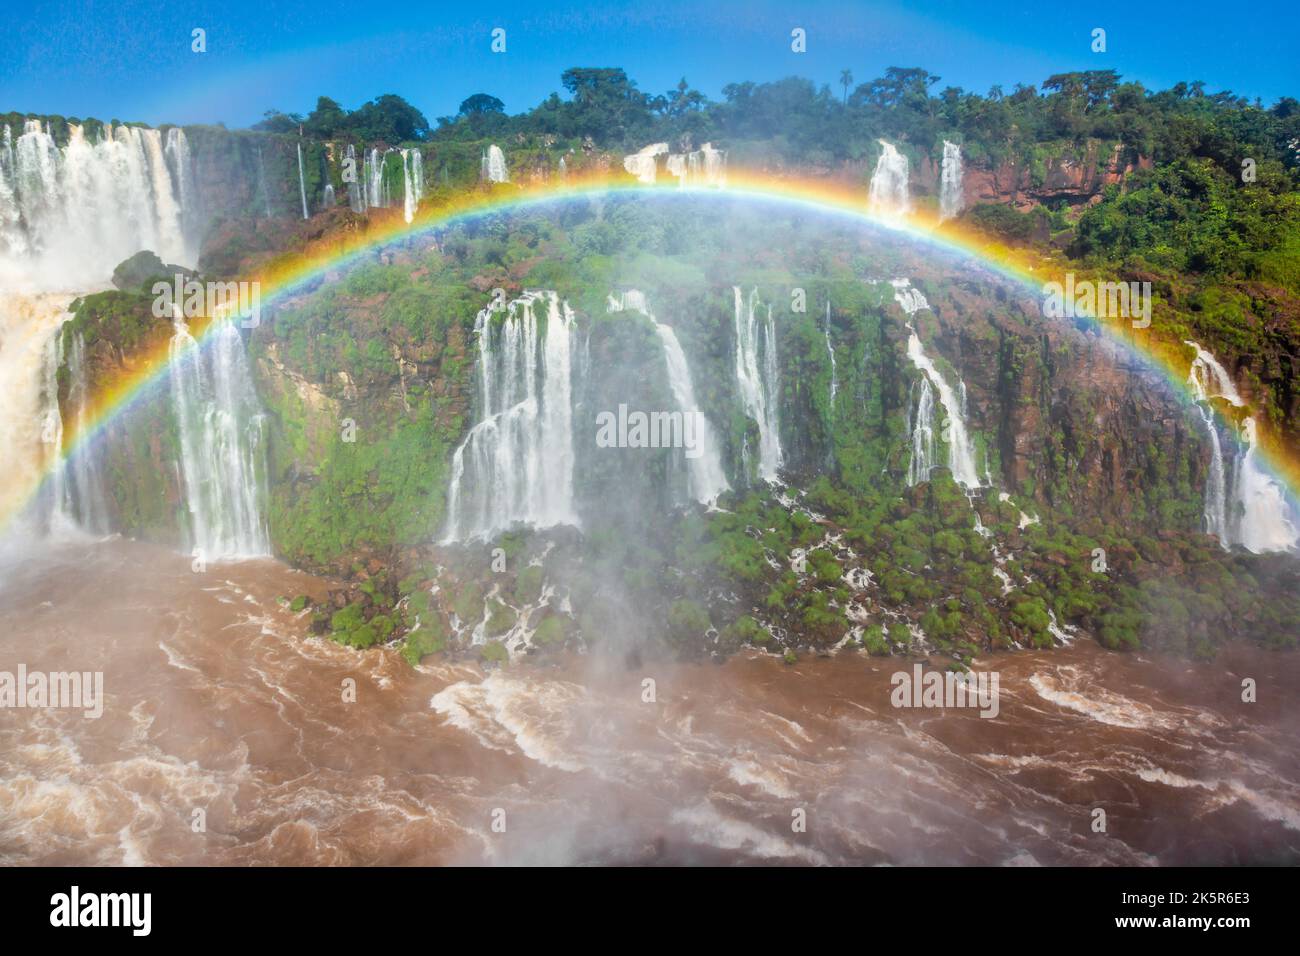 Iguazu Falls dramatic landscape with rainbow, view from Argentina side Stock Photo